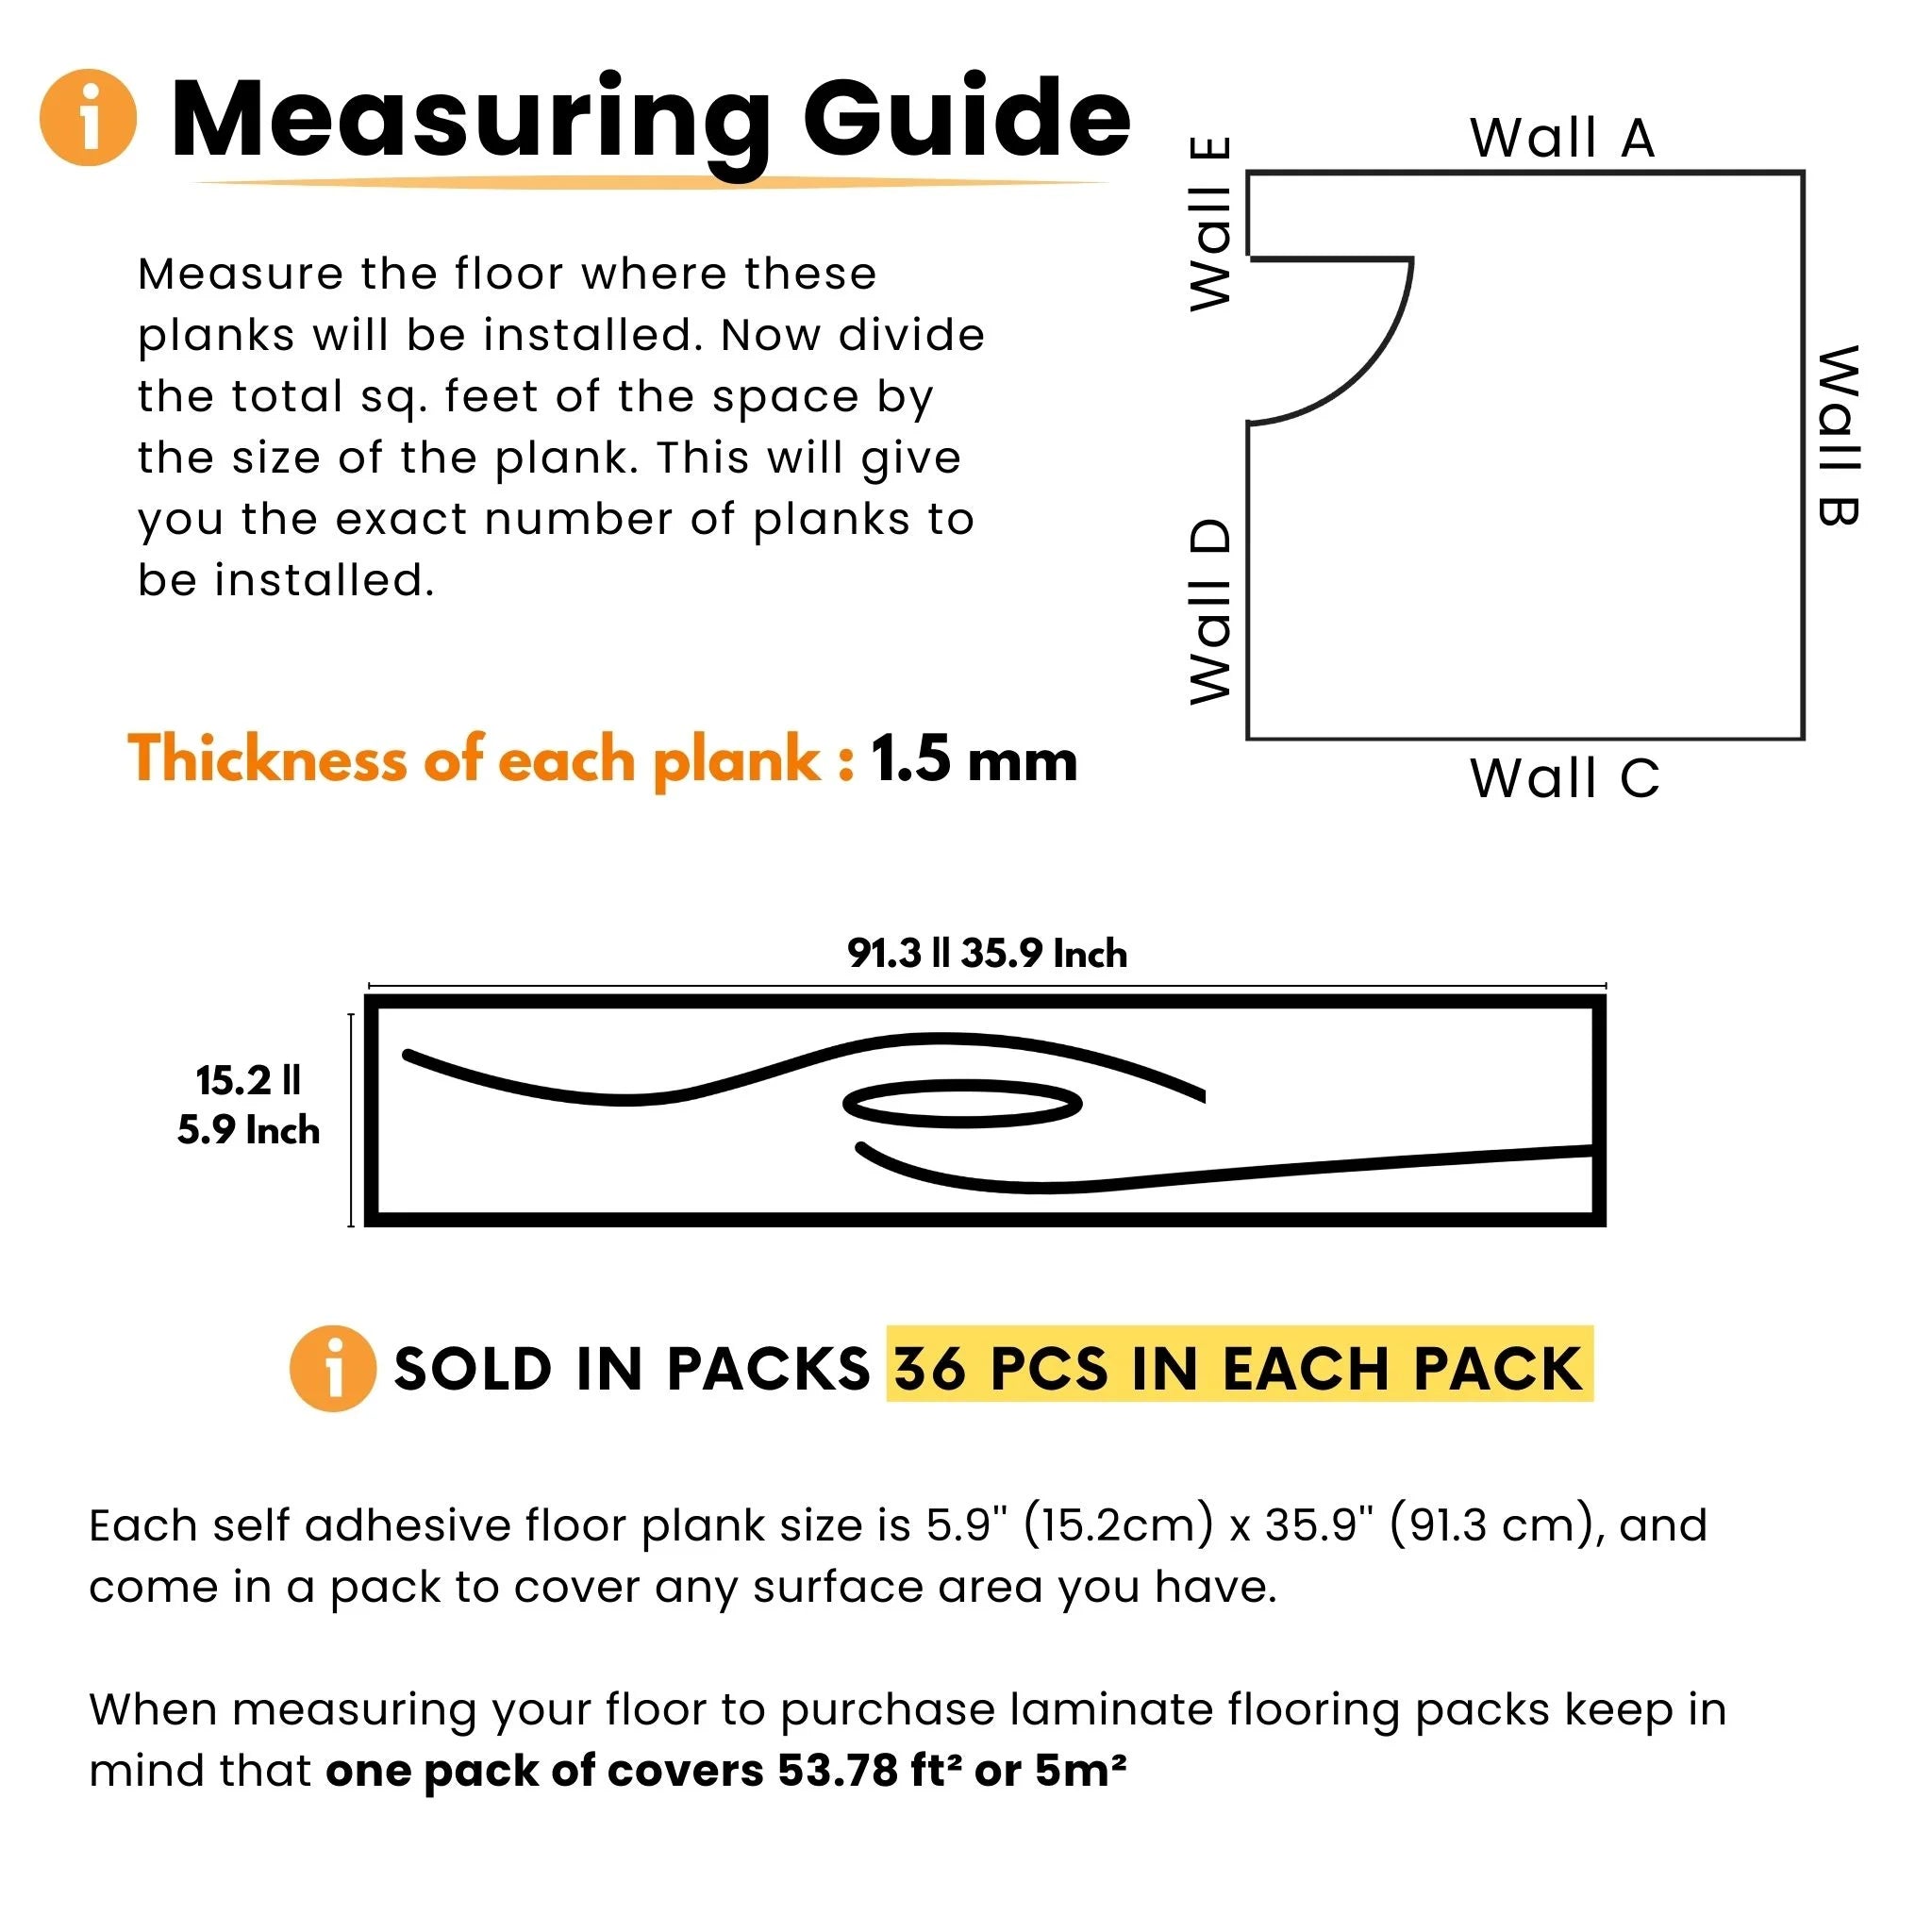 measuring guide for self-adhesive floor planks with details on thickness and packaging